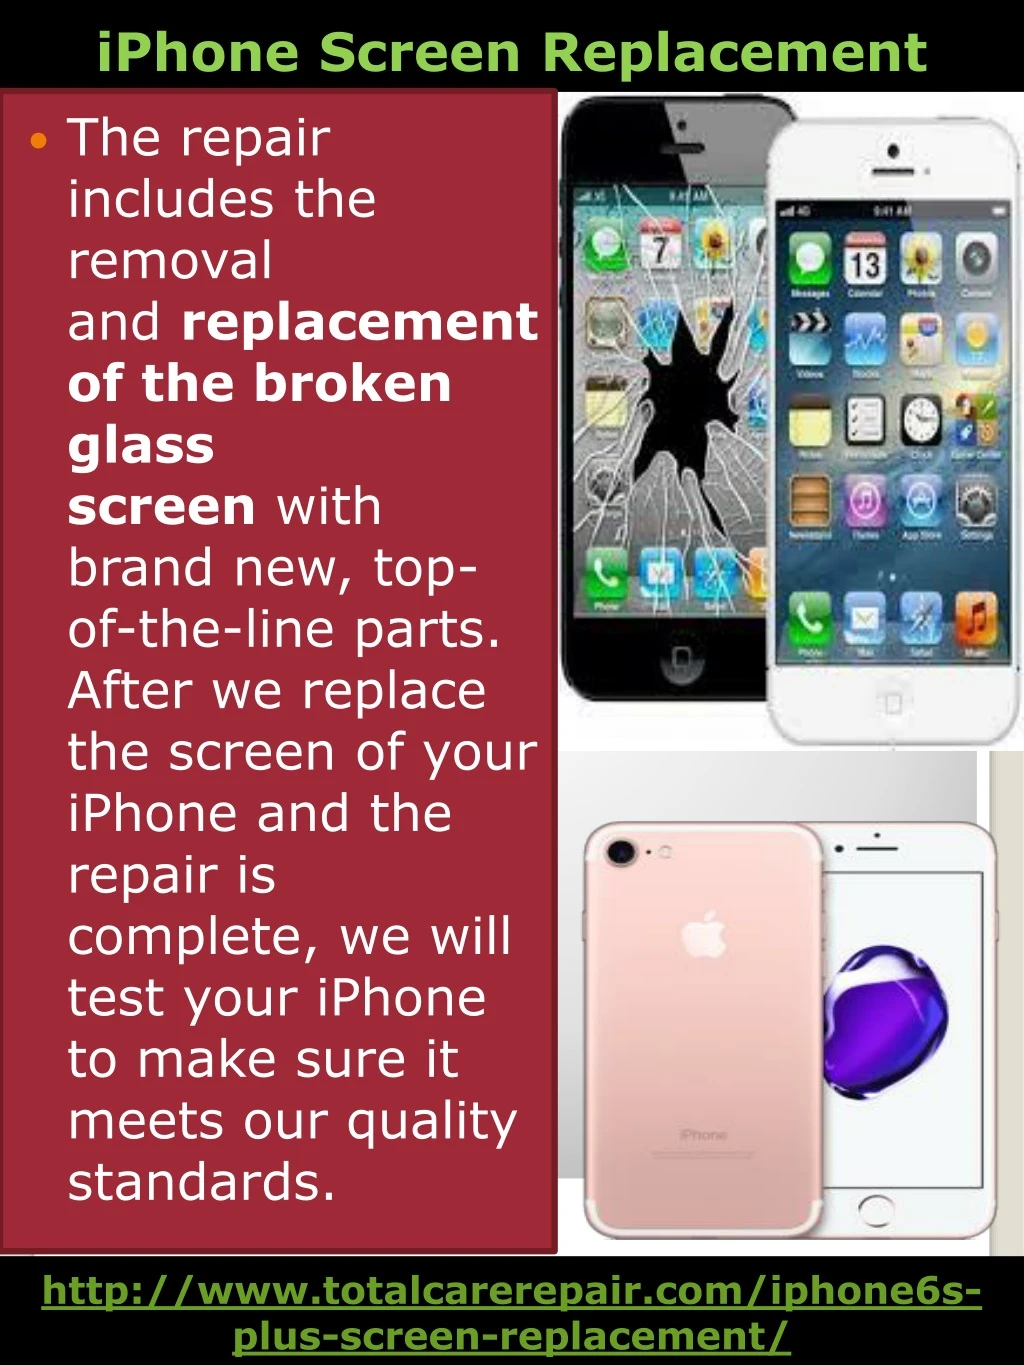 iphone screen replacement